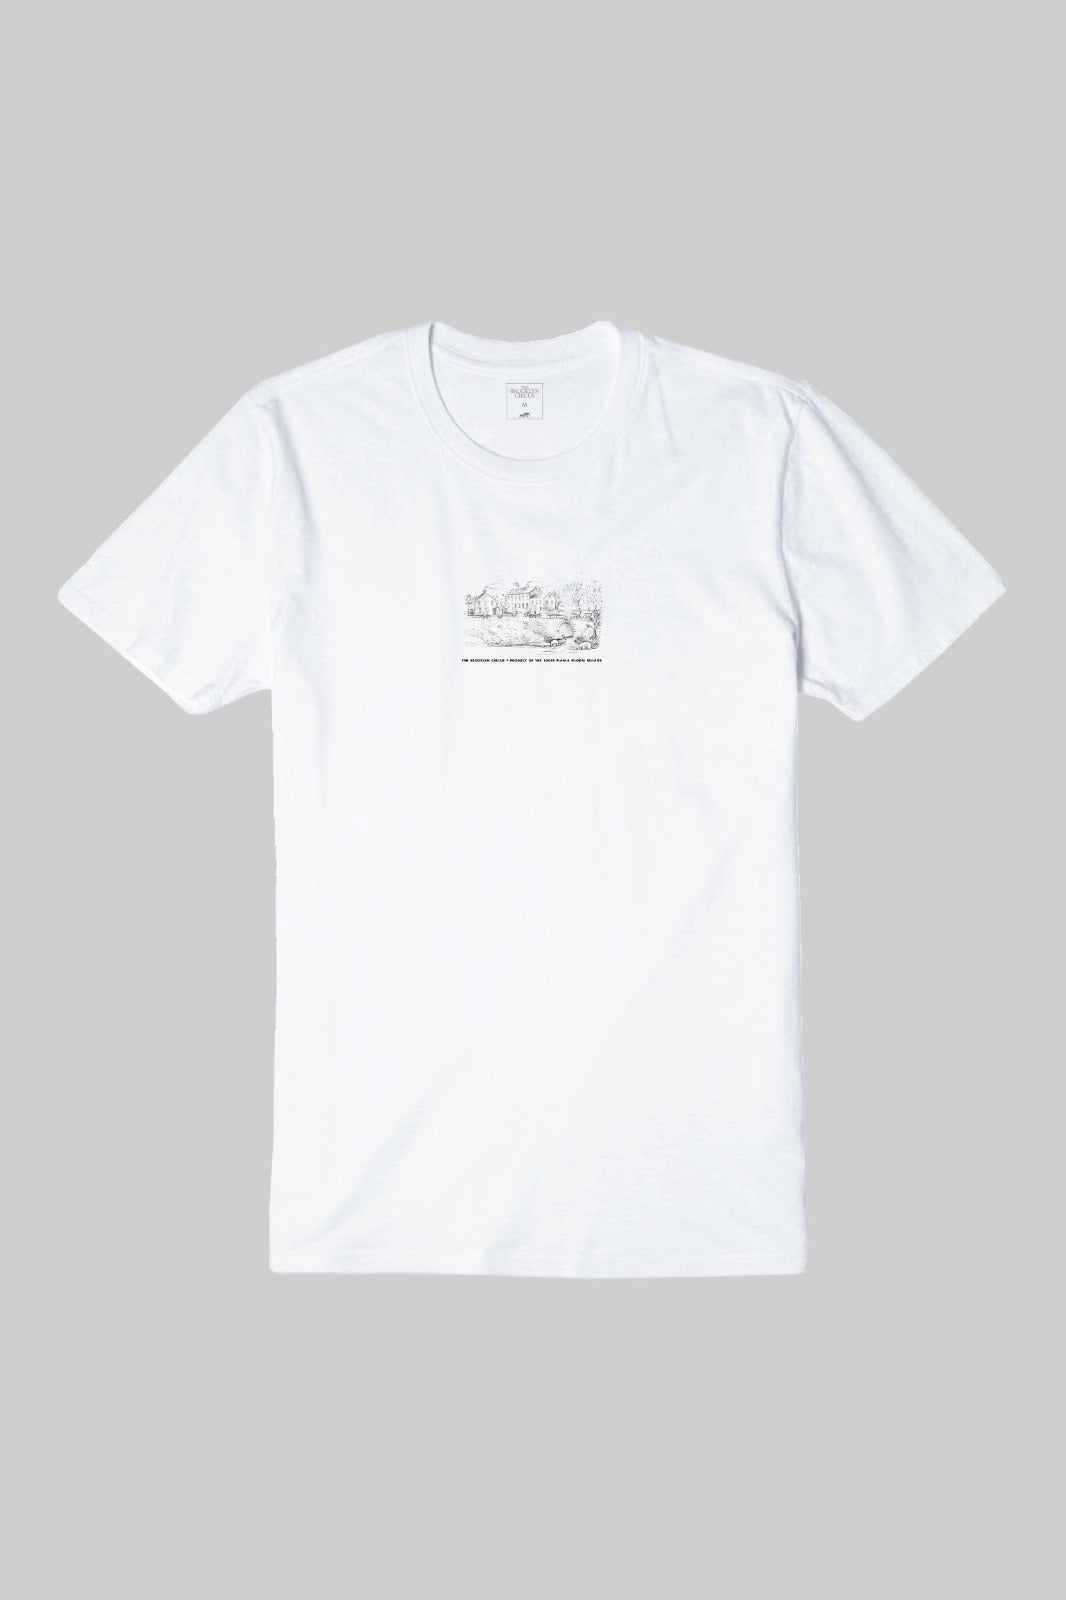 BKc Canal Street Front Village White Tee